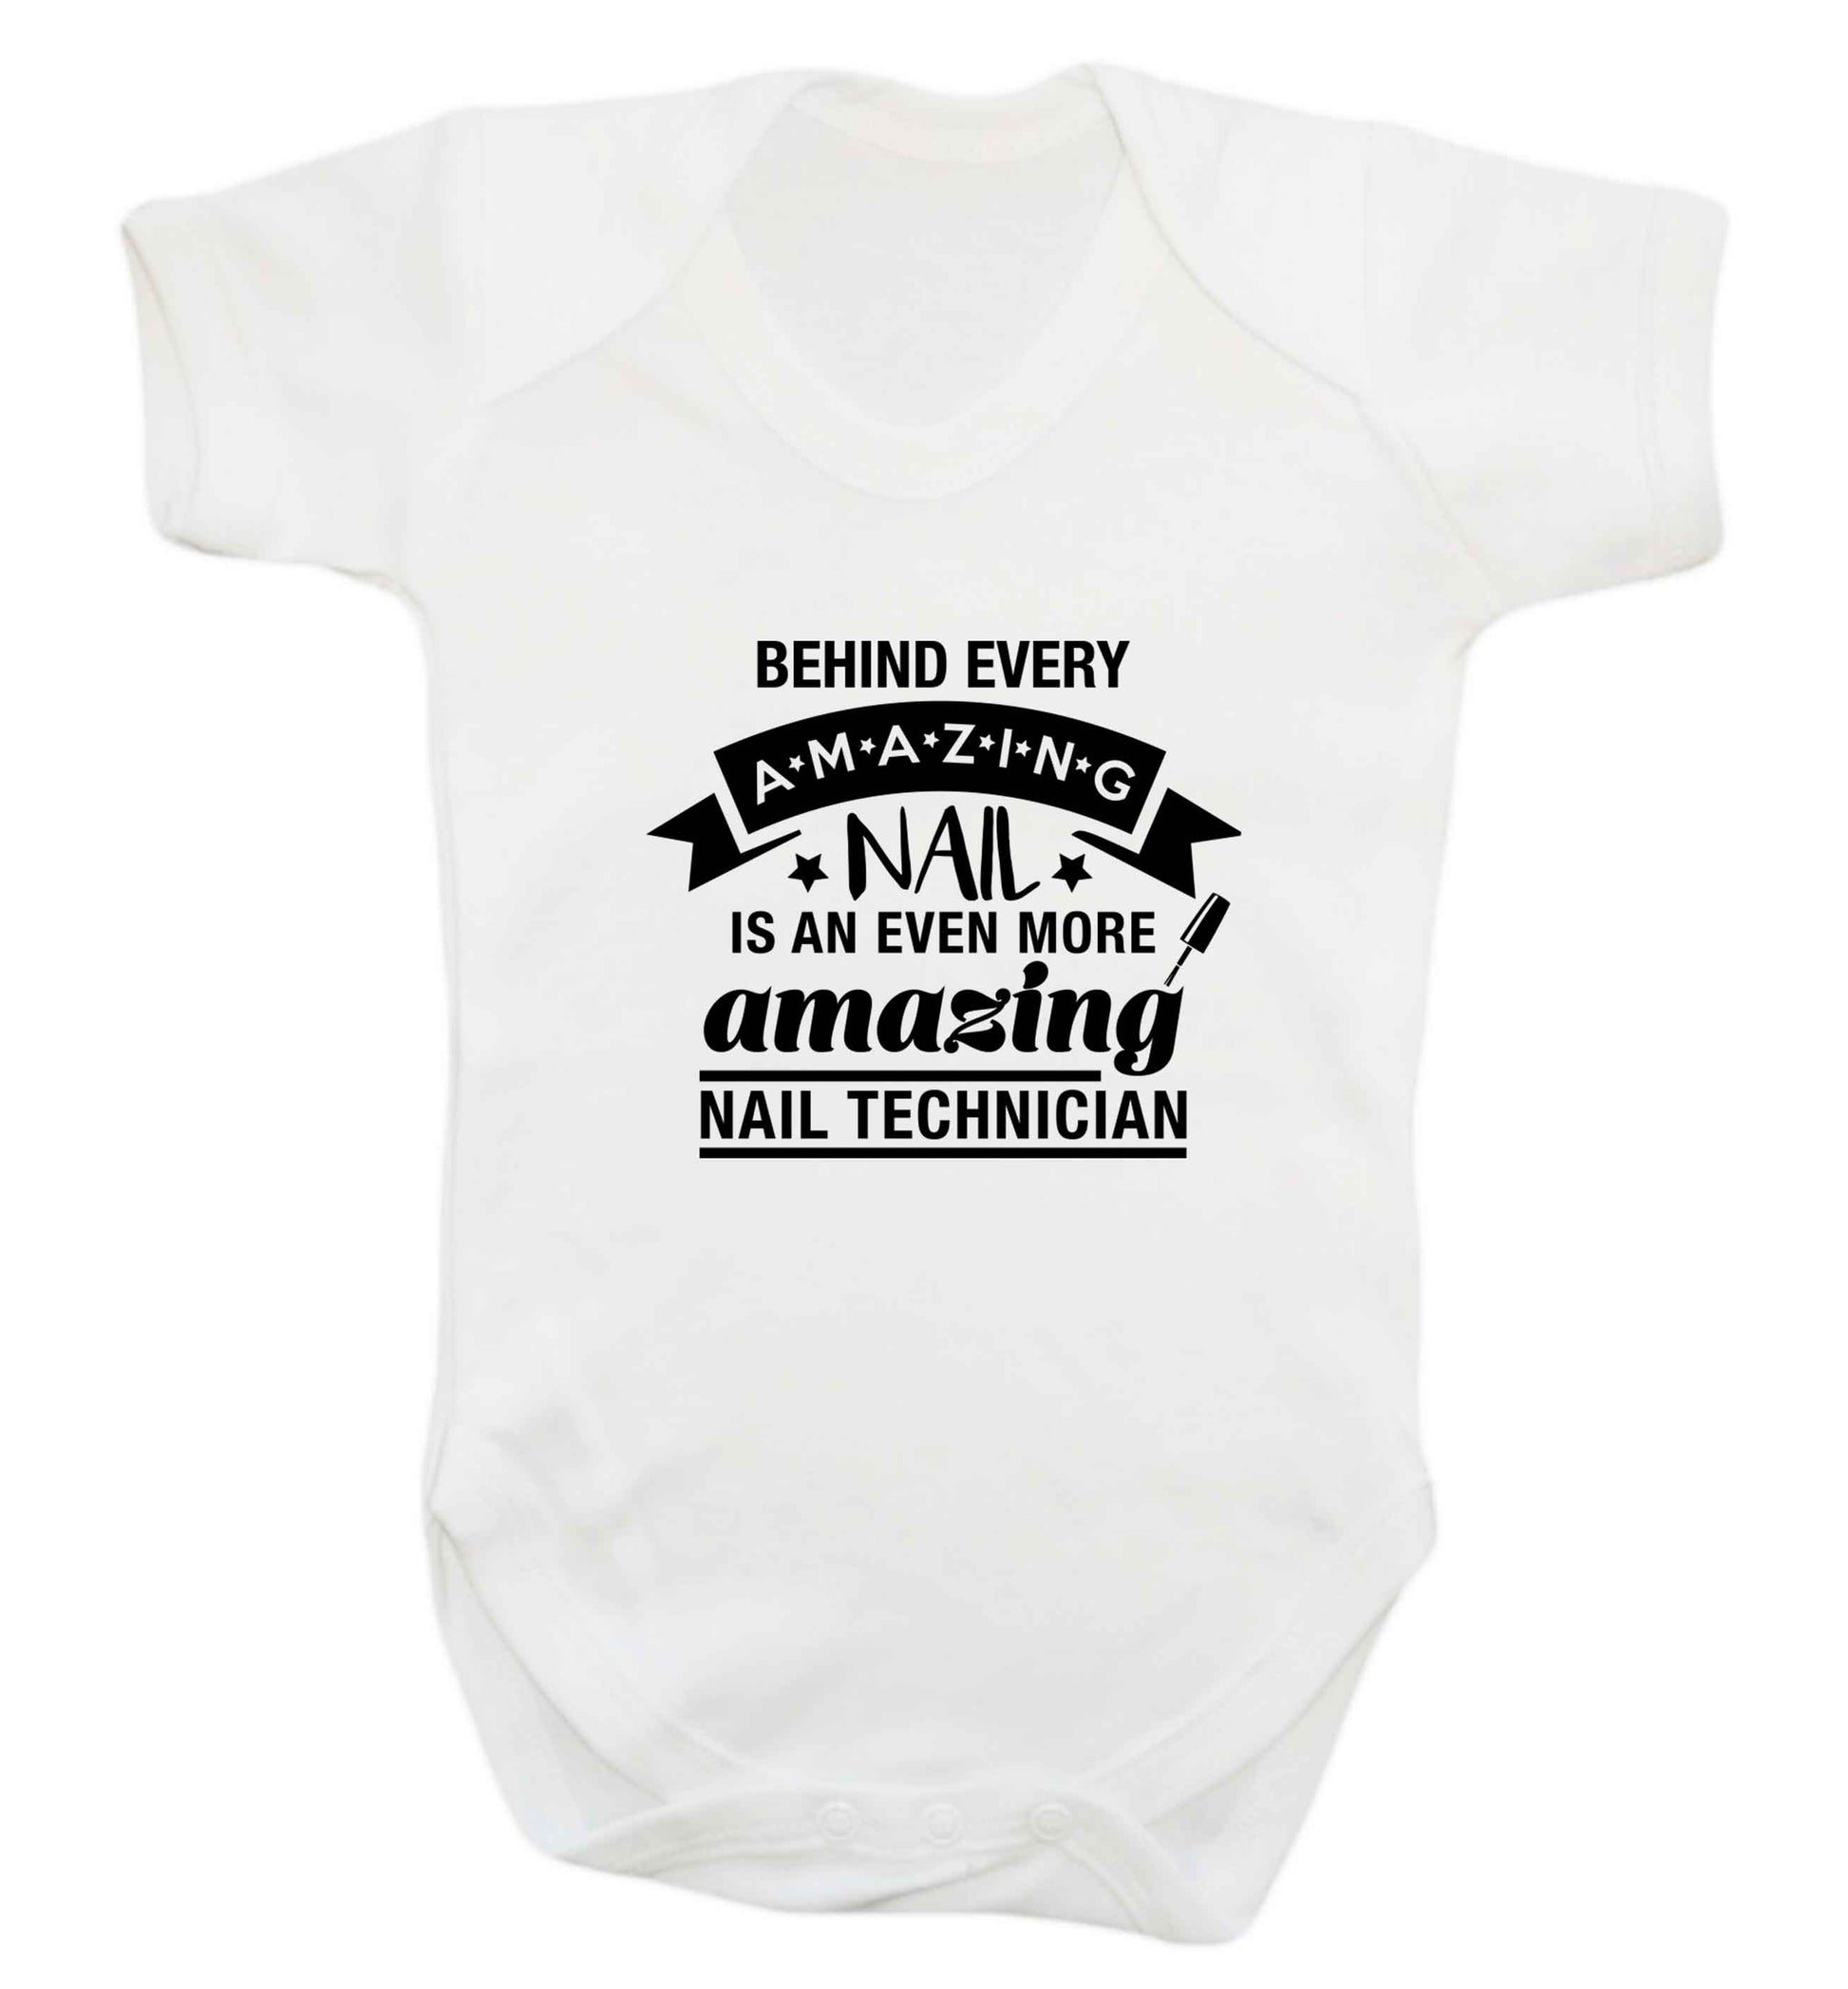 Behind every amazing nail is an even more amazing nail technician baby vest white 18-24 months